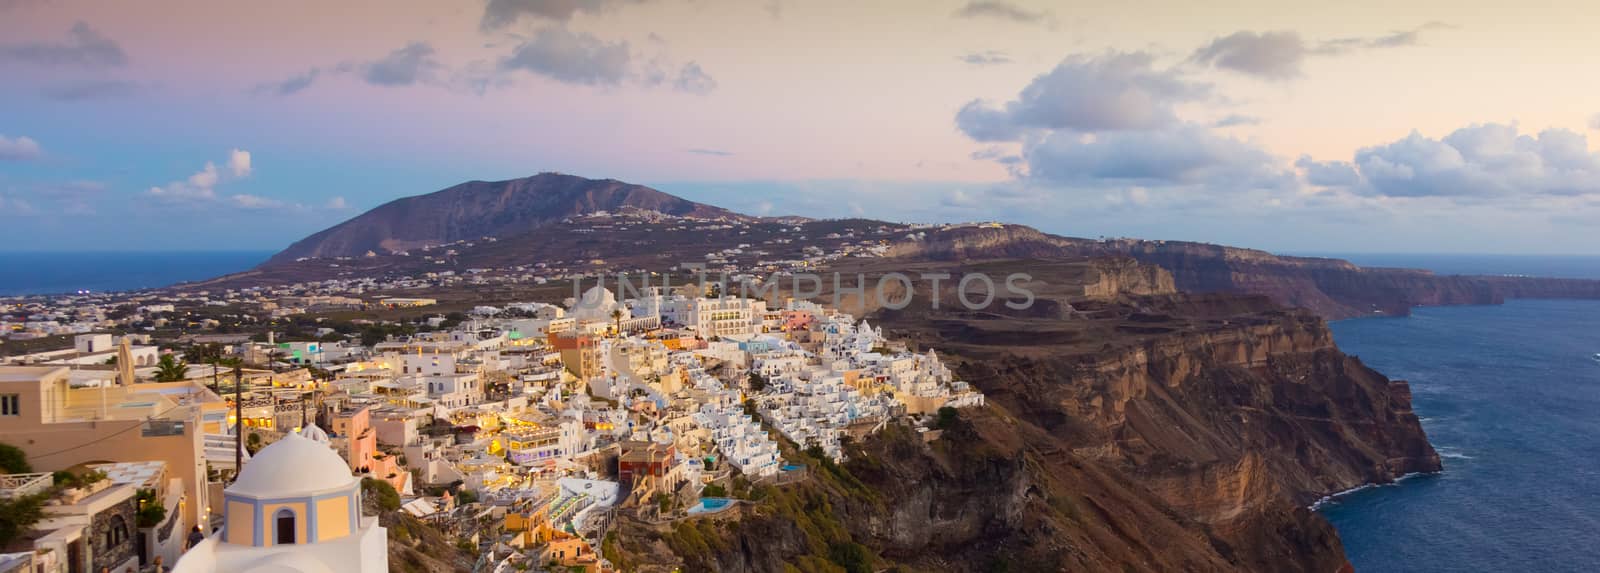 Cityscape of Fira, dramatically located on the edge of the caldera cliff on the island of Thira known as Santorini, Greece. Panorama shot at dusk.